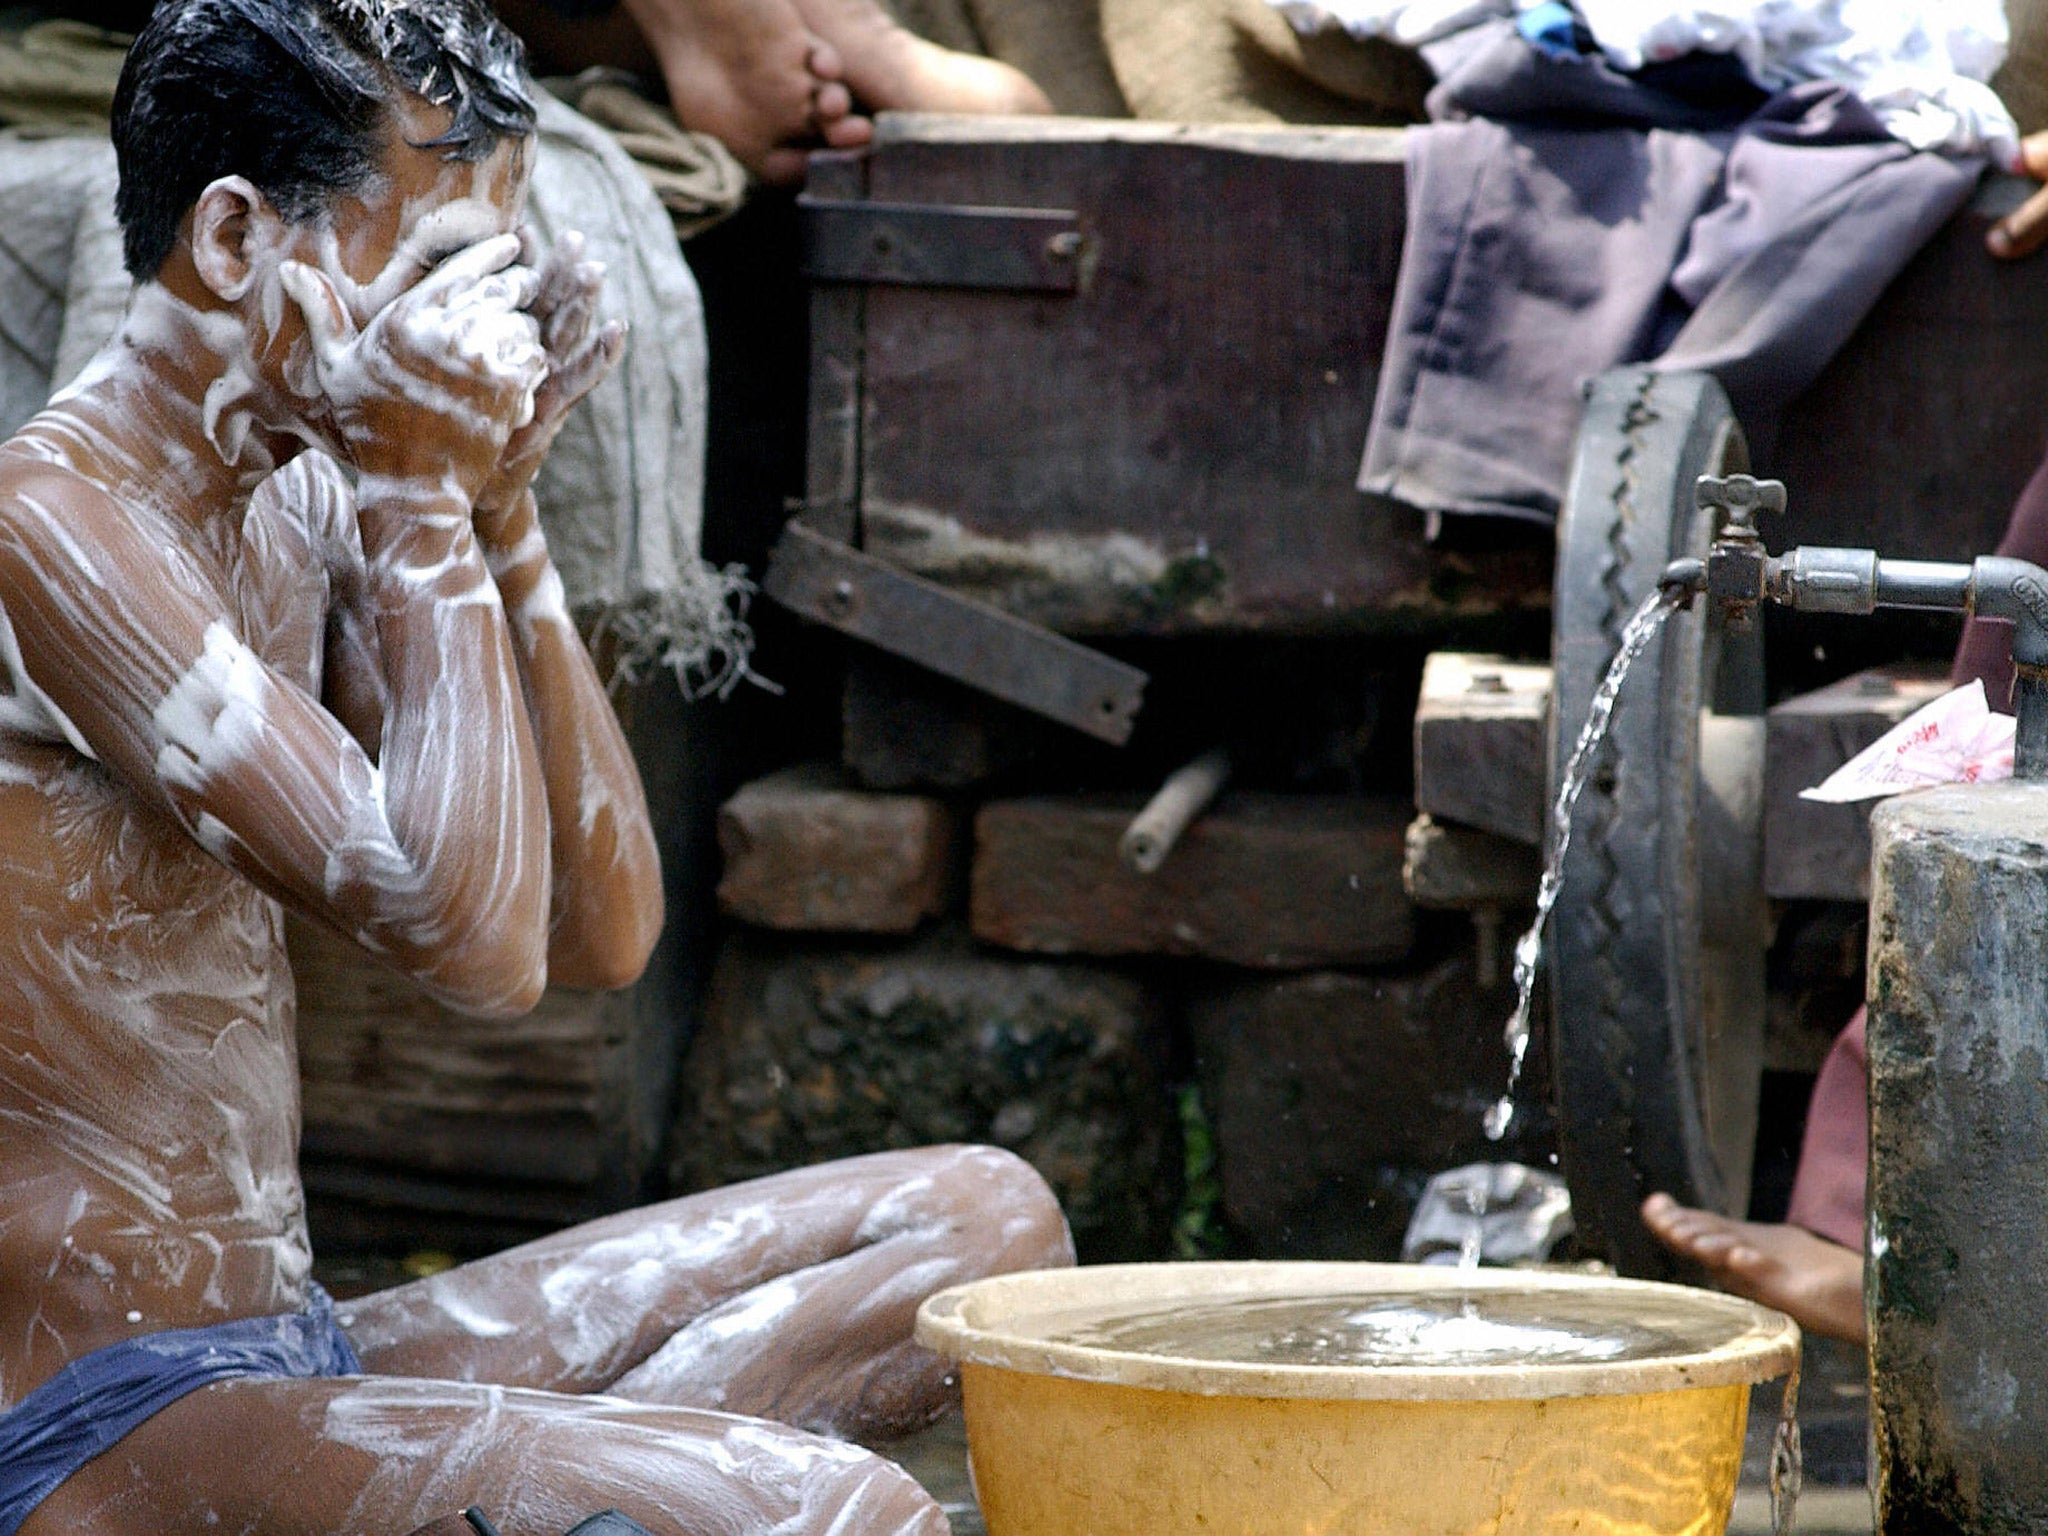 A boy has a wash with clean water and soap in India